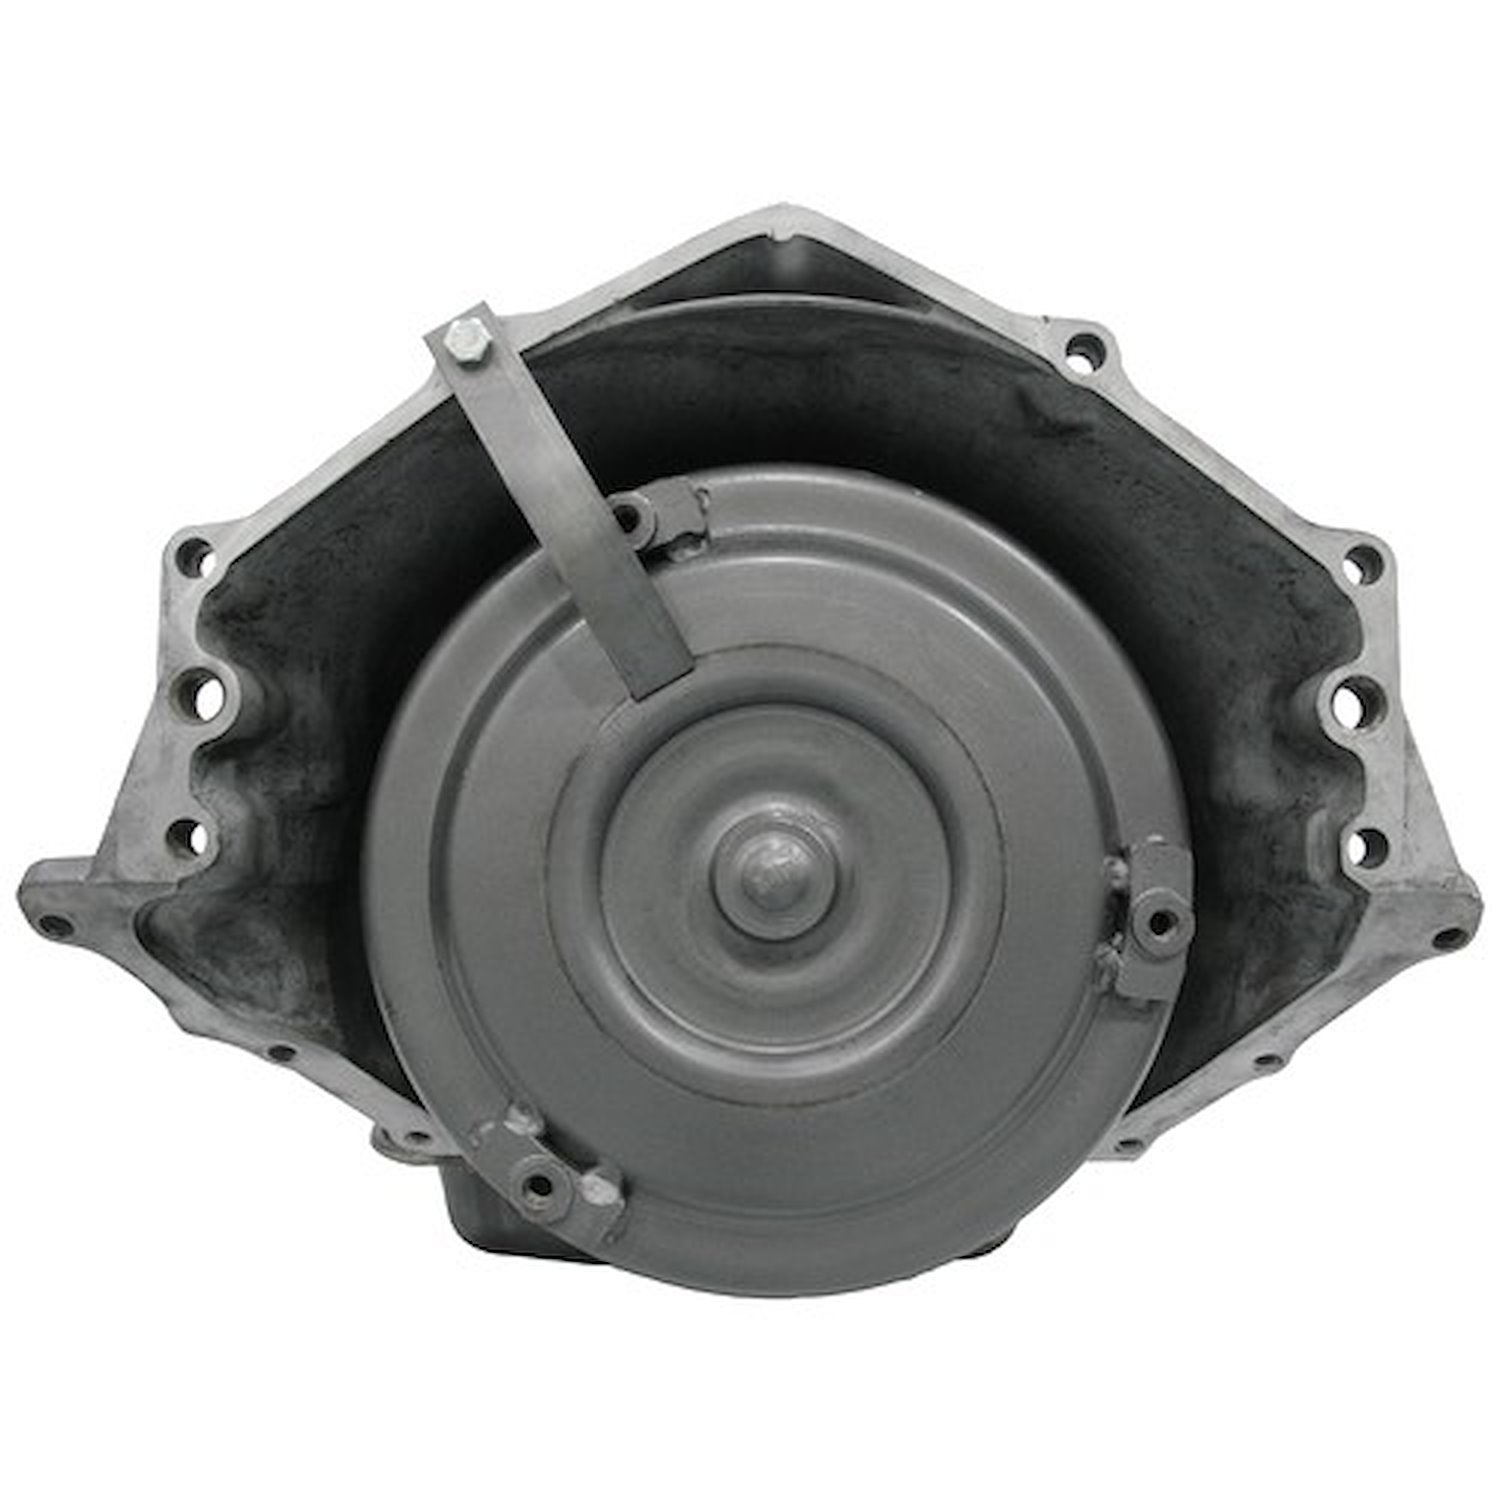 4F27E Reman Auto Trans Fits 2009-2011 Ford Focus, 2010-2011 Ford Transit Connect w/2.0L 4cyl. Eng.